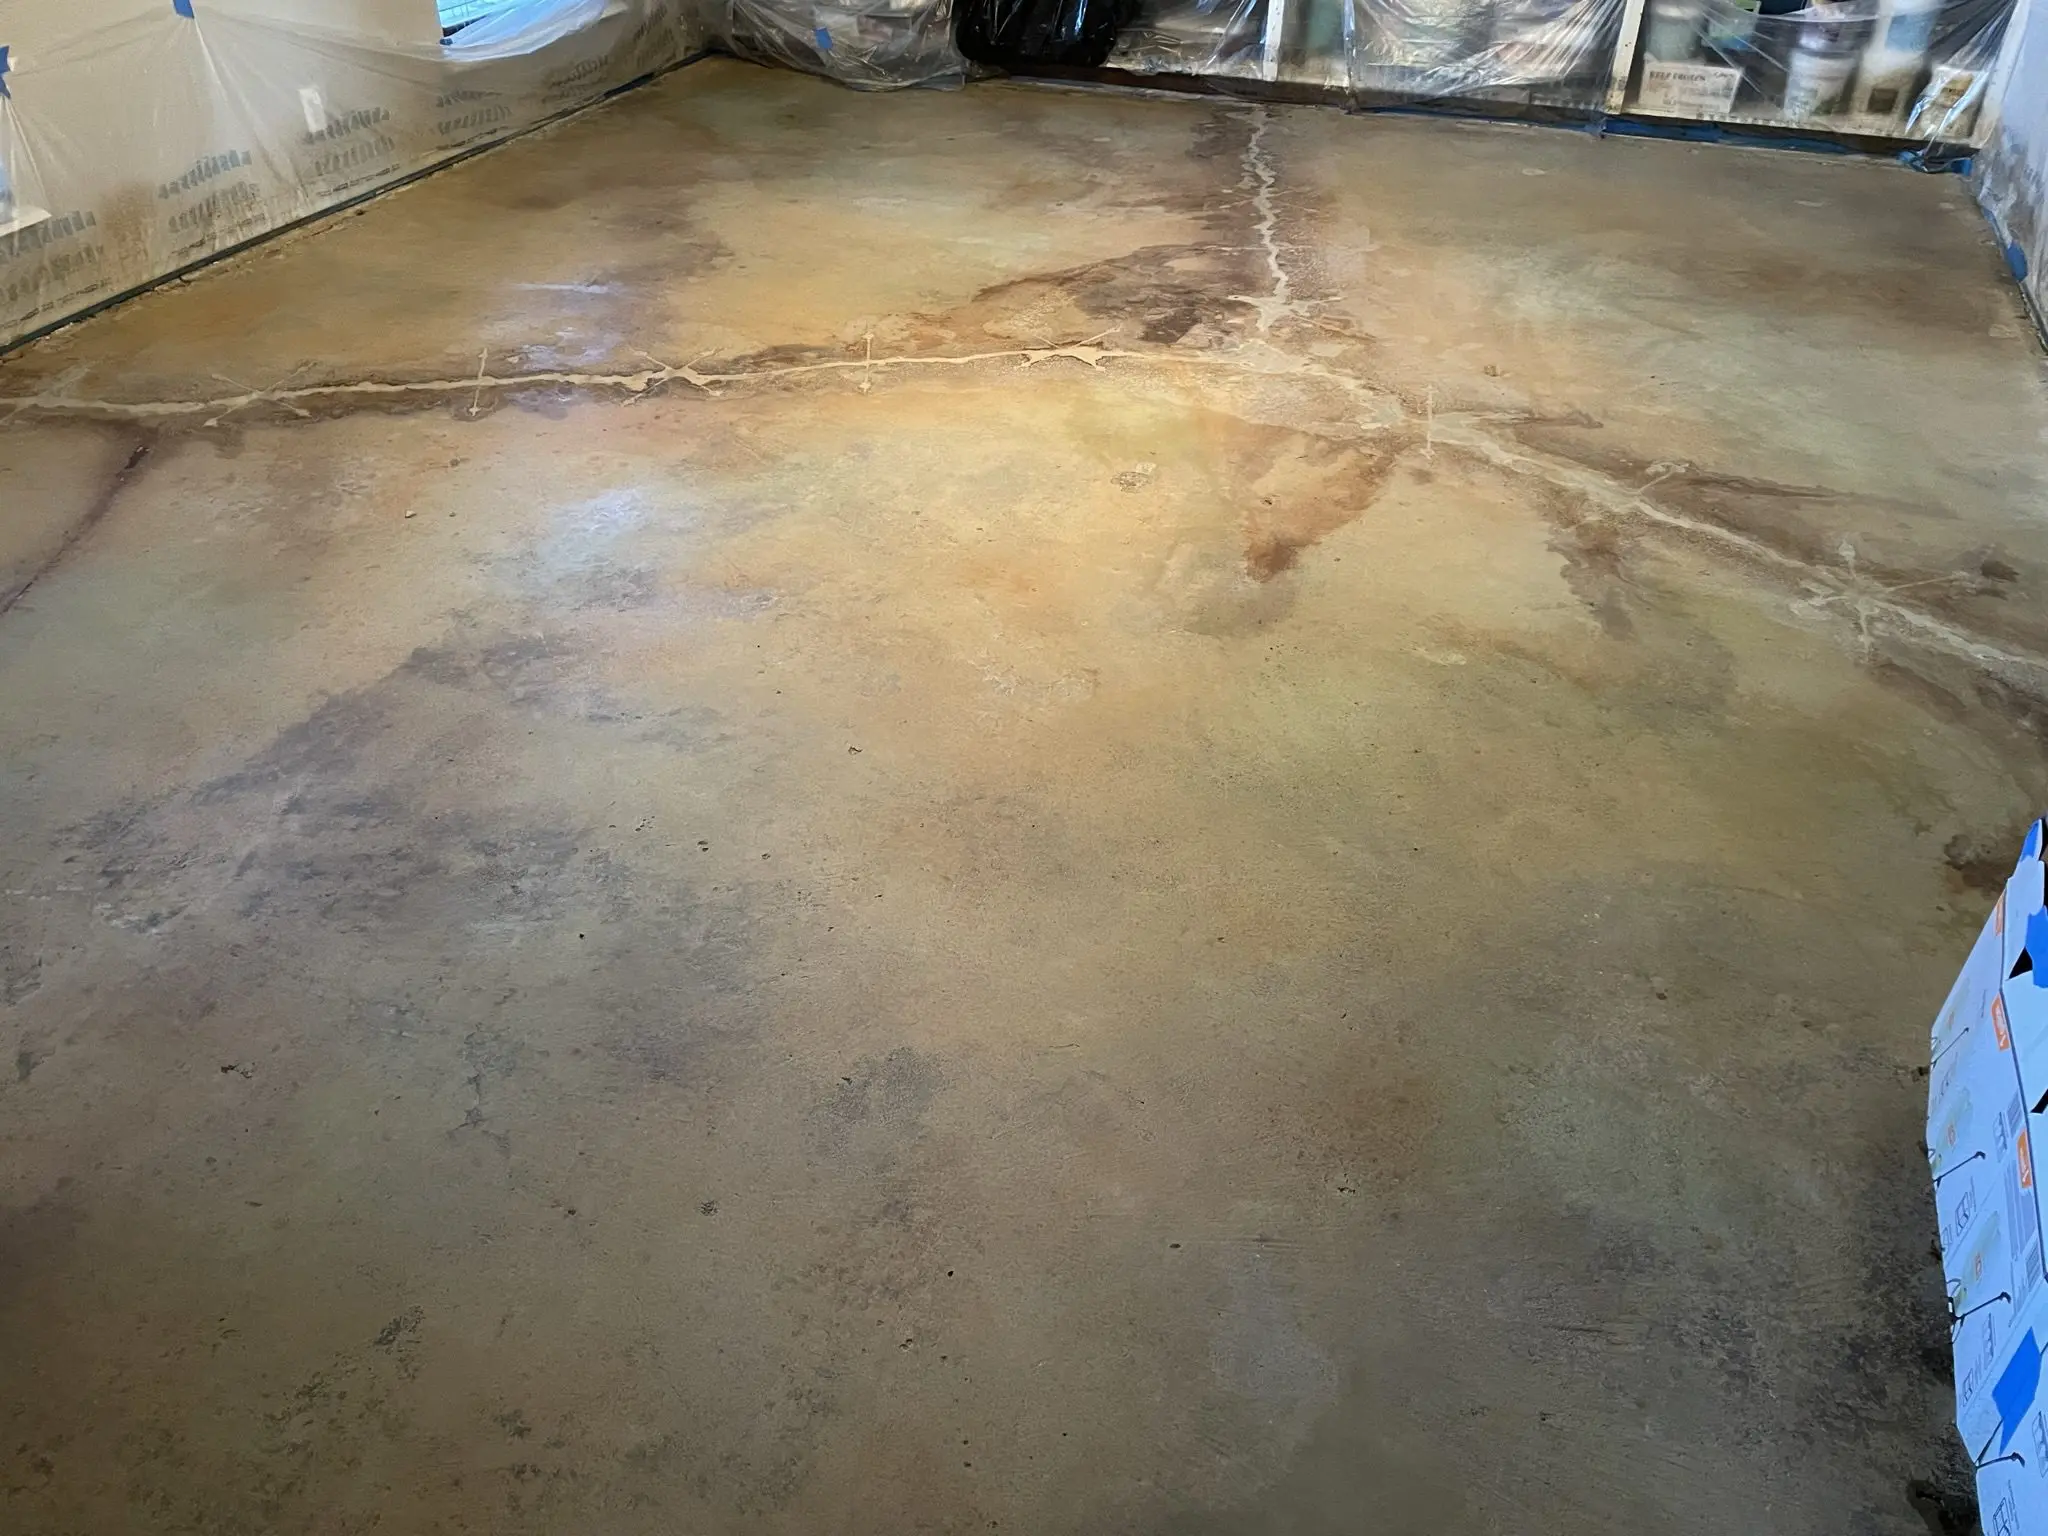 An image of the floor after the acid stains have been neutralized.